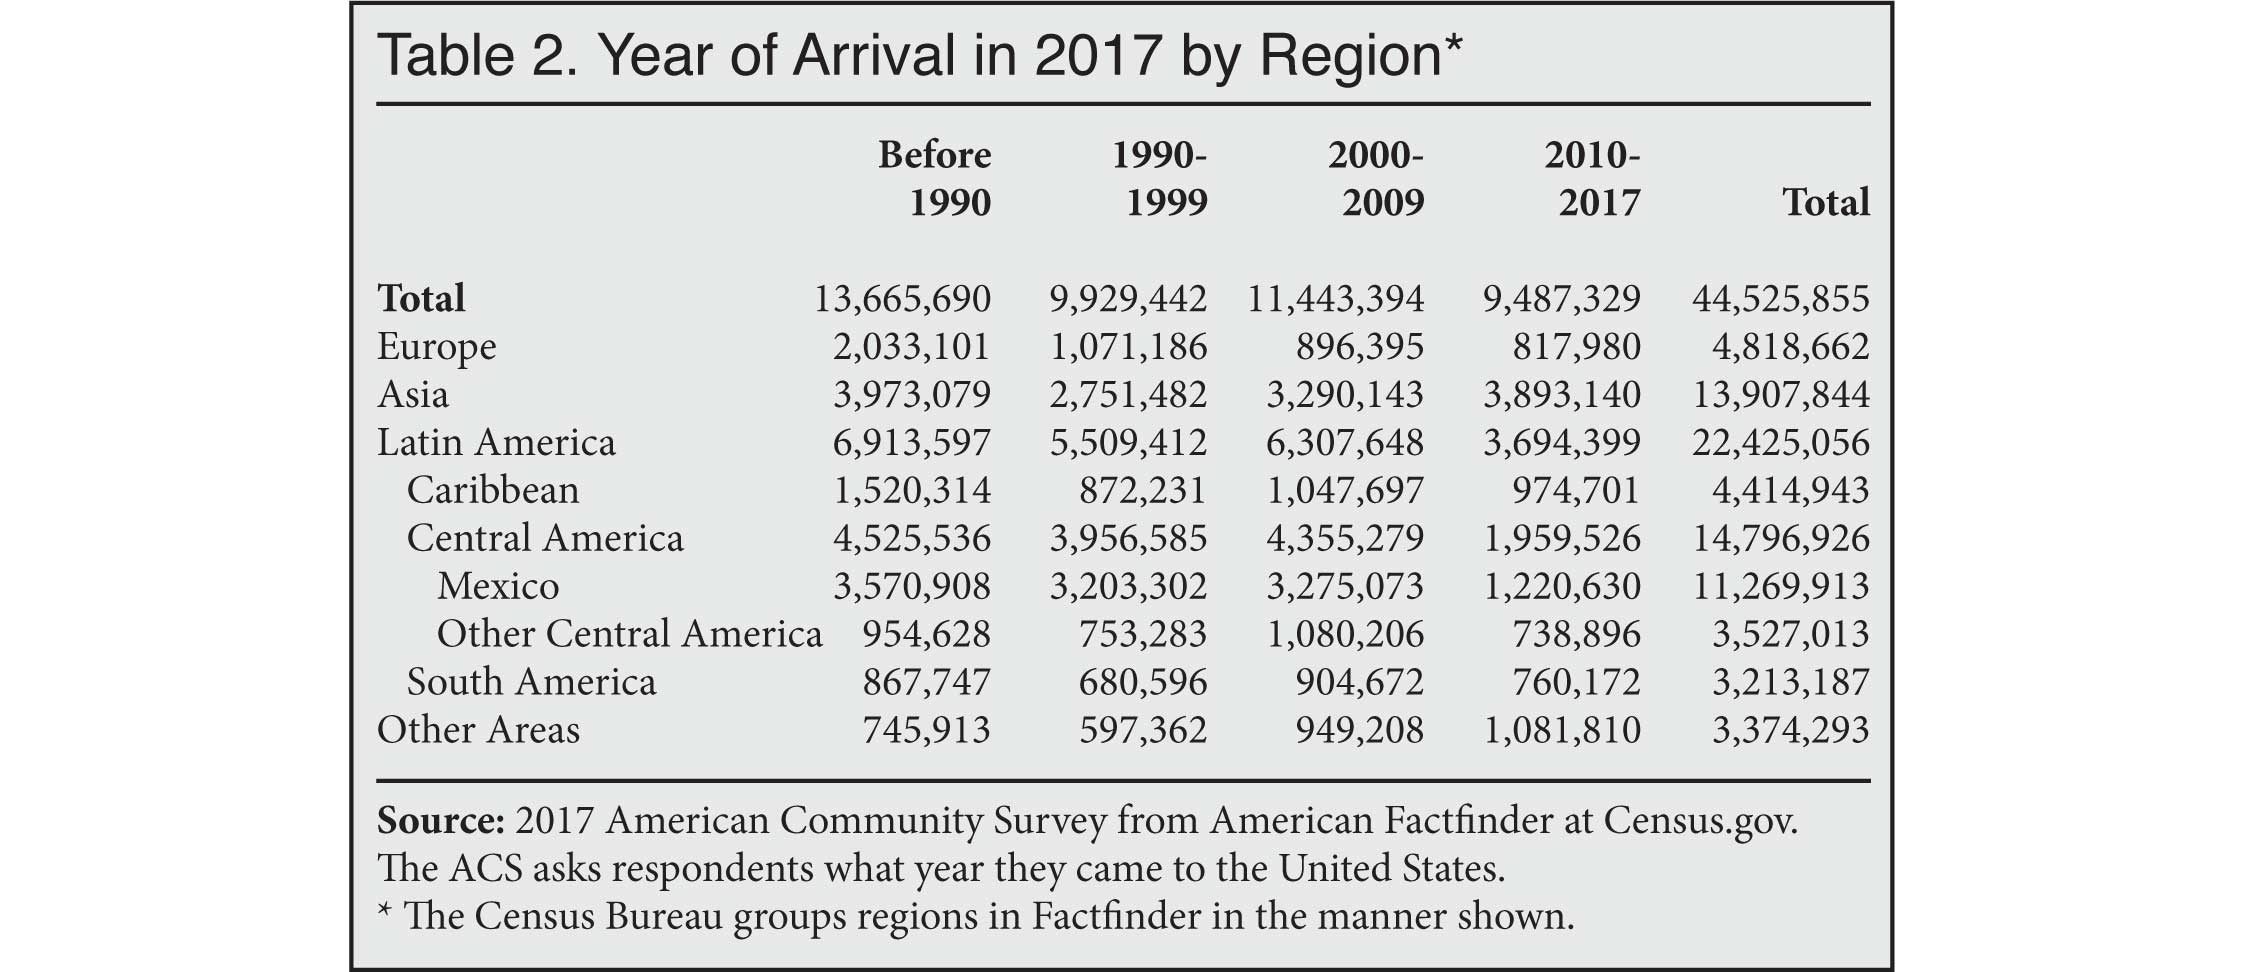 Table: Year of Arrival in 2017 by Region